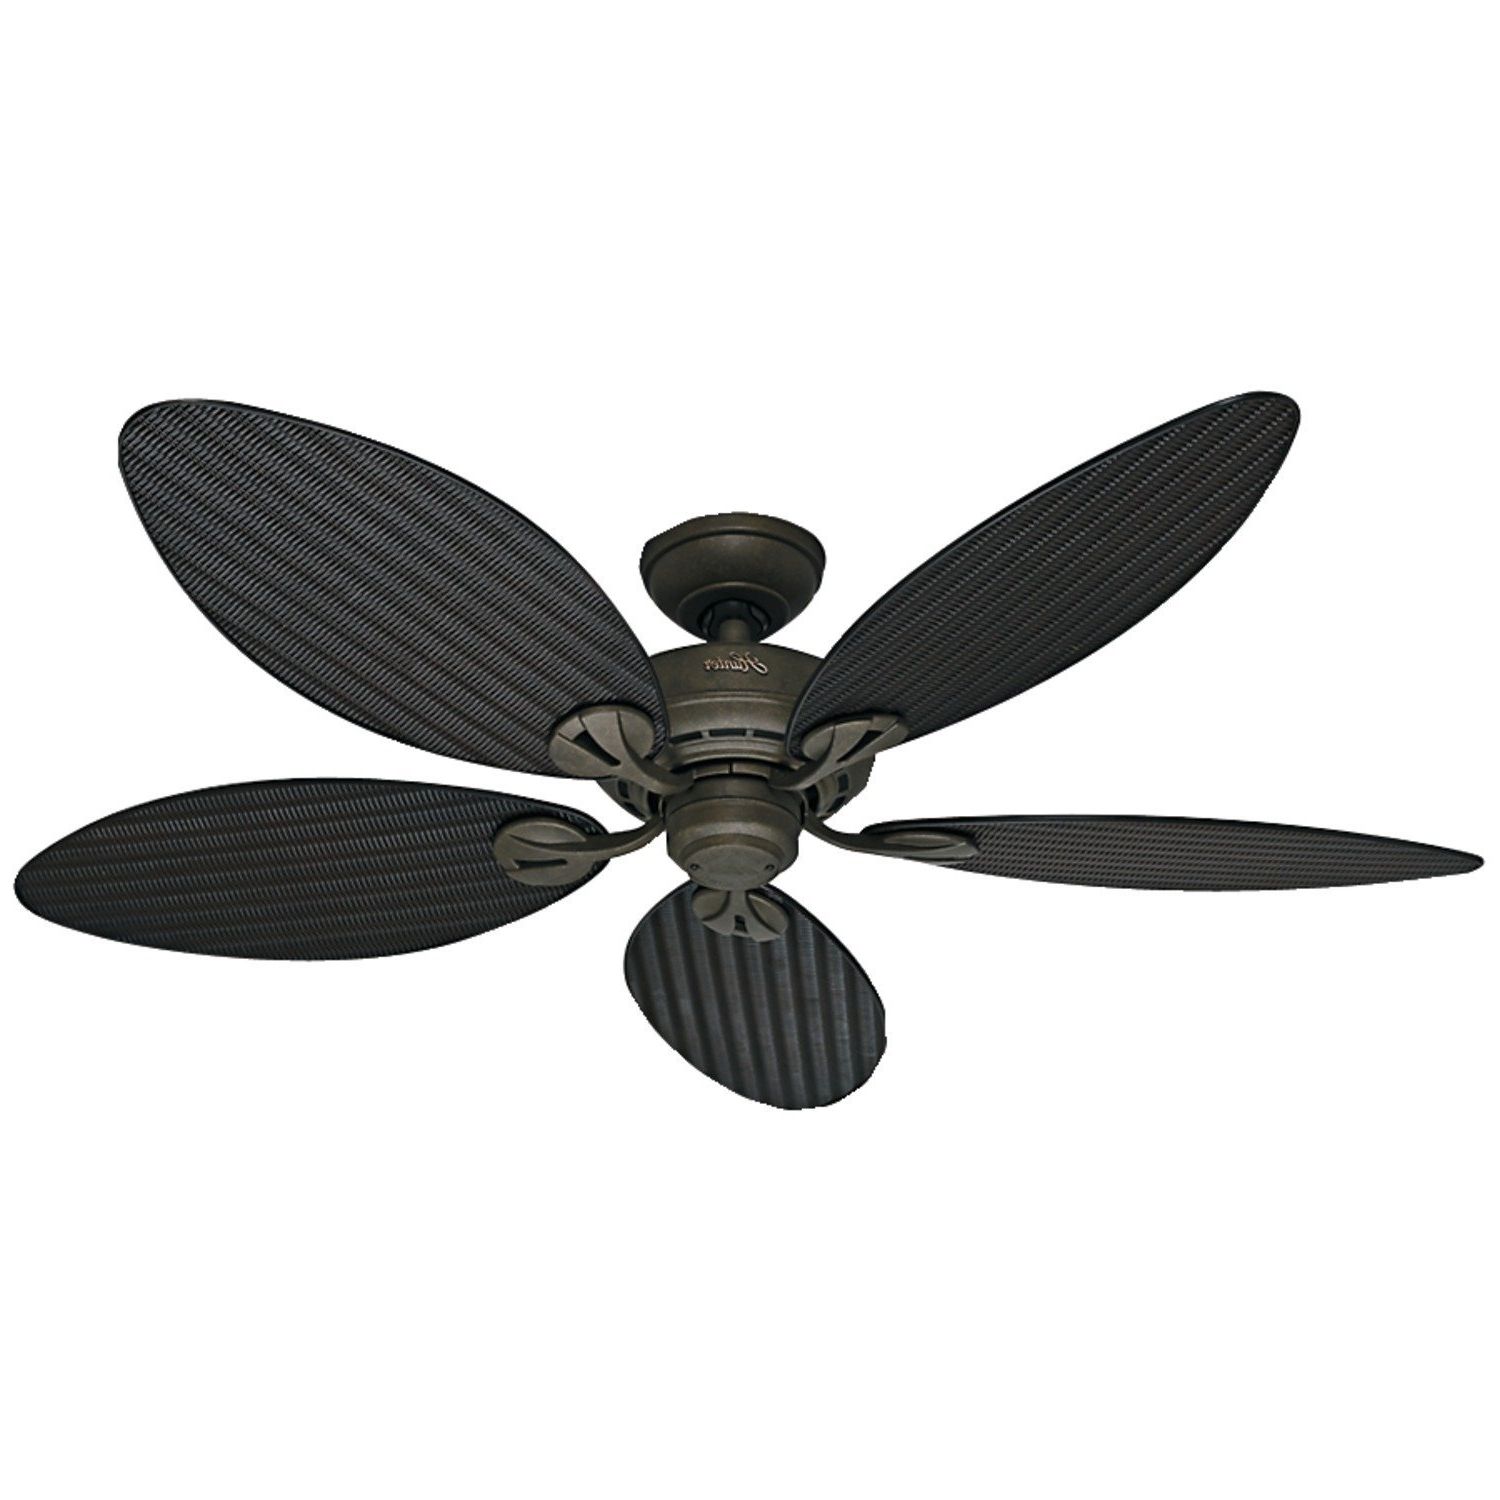 Outdoor Ceiling Fans With Leaf Blades In Best And Newest Ceiling: Marvellous Ceiling Fans With Leaf Shaped Blades Wicker (View 3 of 20)